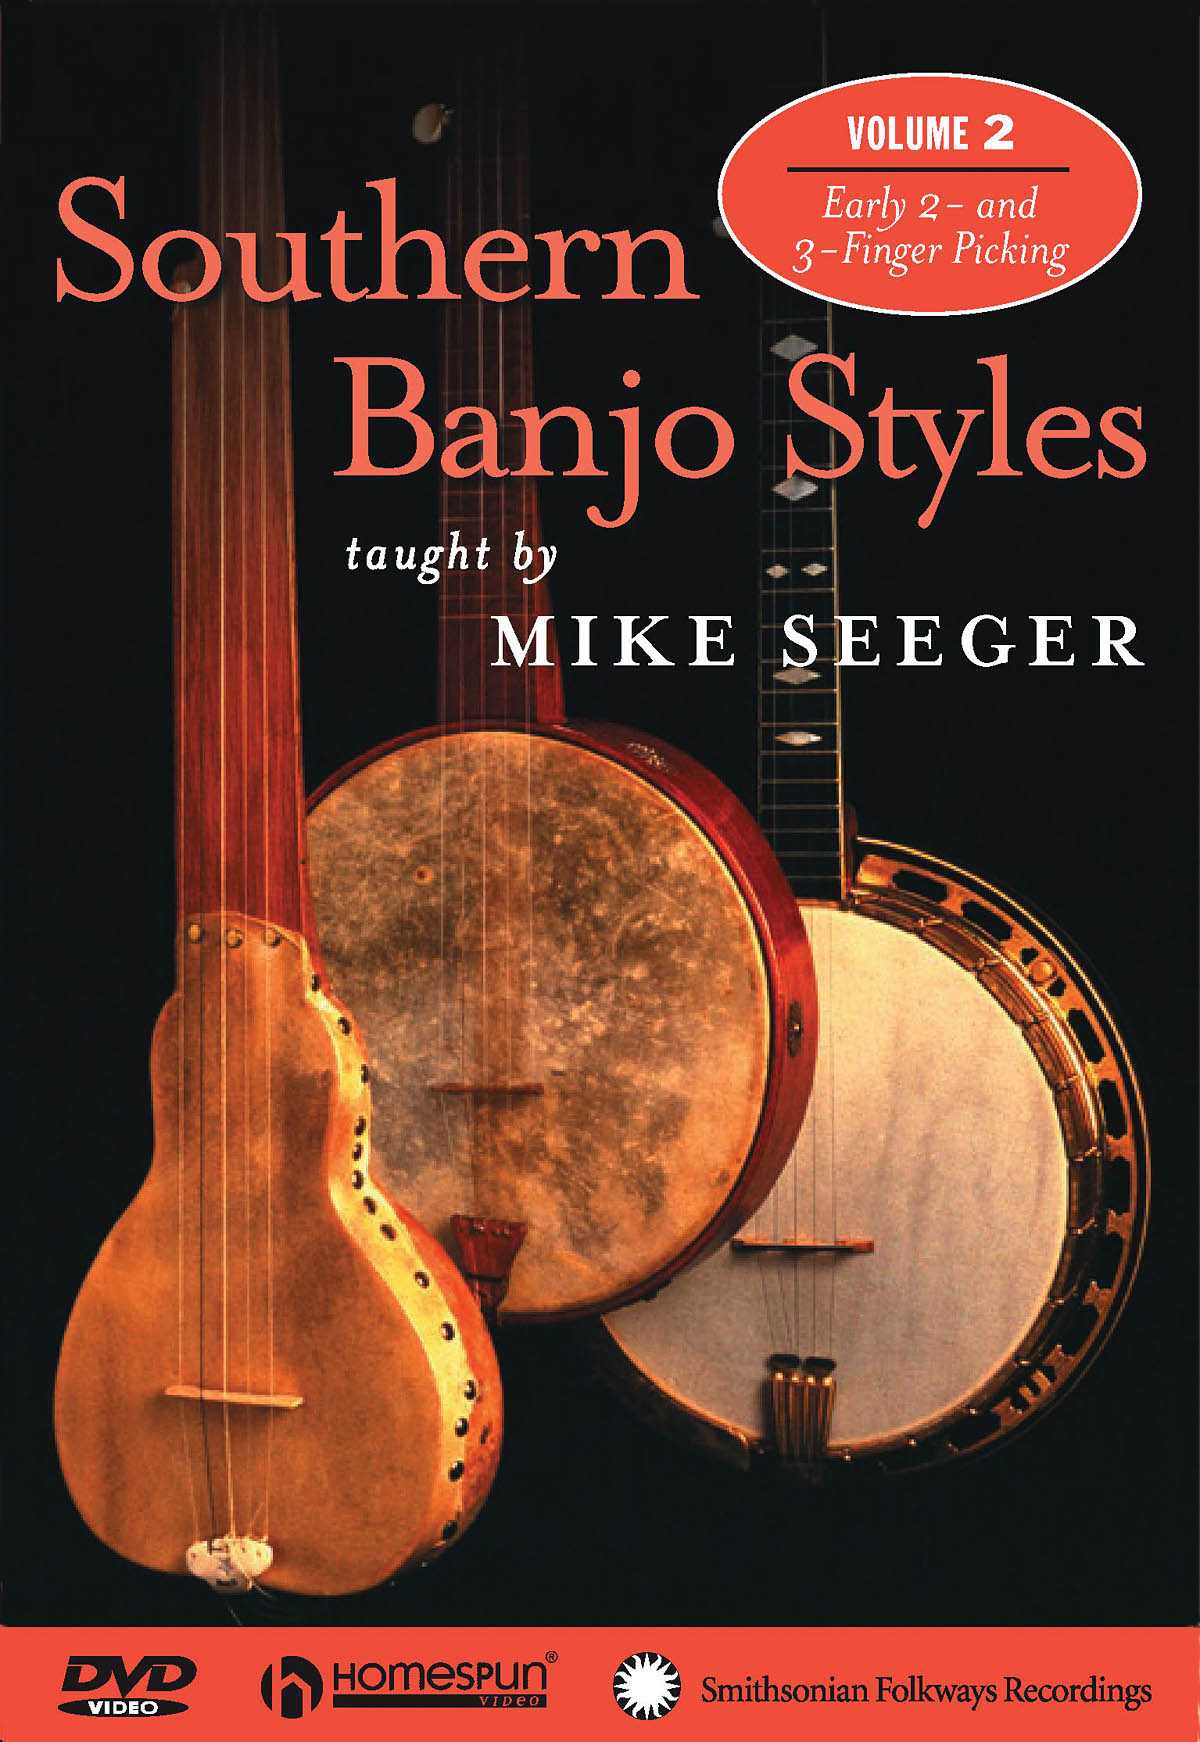 Image 1 of DOWNLOAD ONLY - Southern Banjo Styles: Vol. 2 - SKU# 300-DVD302 : Product Type Media : Elderly Instruments